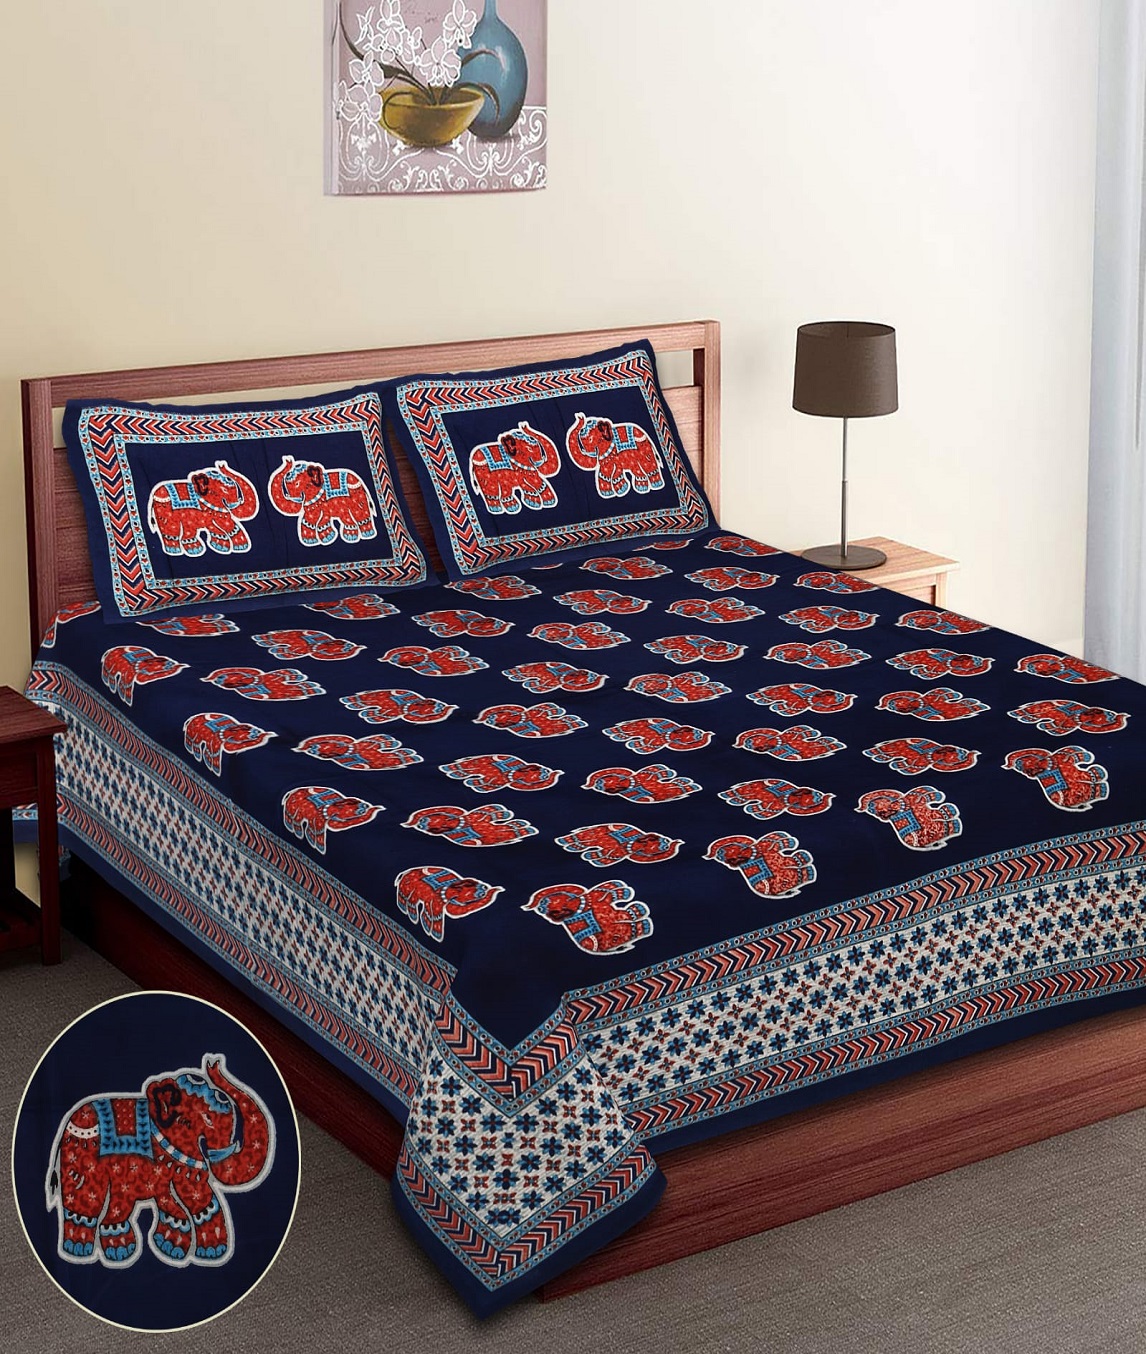 King size bedsheet with pillow covers